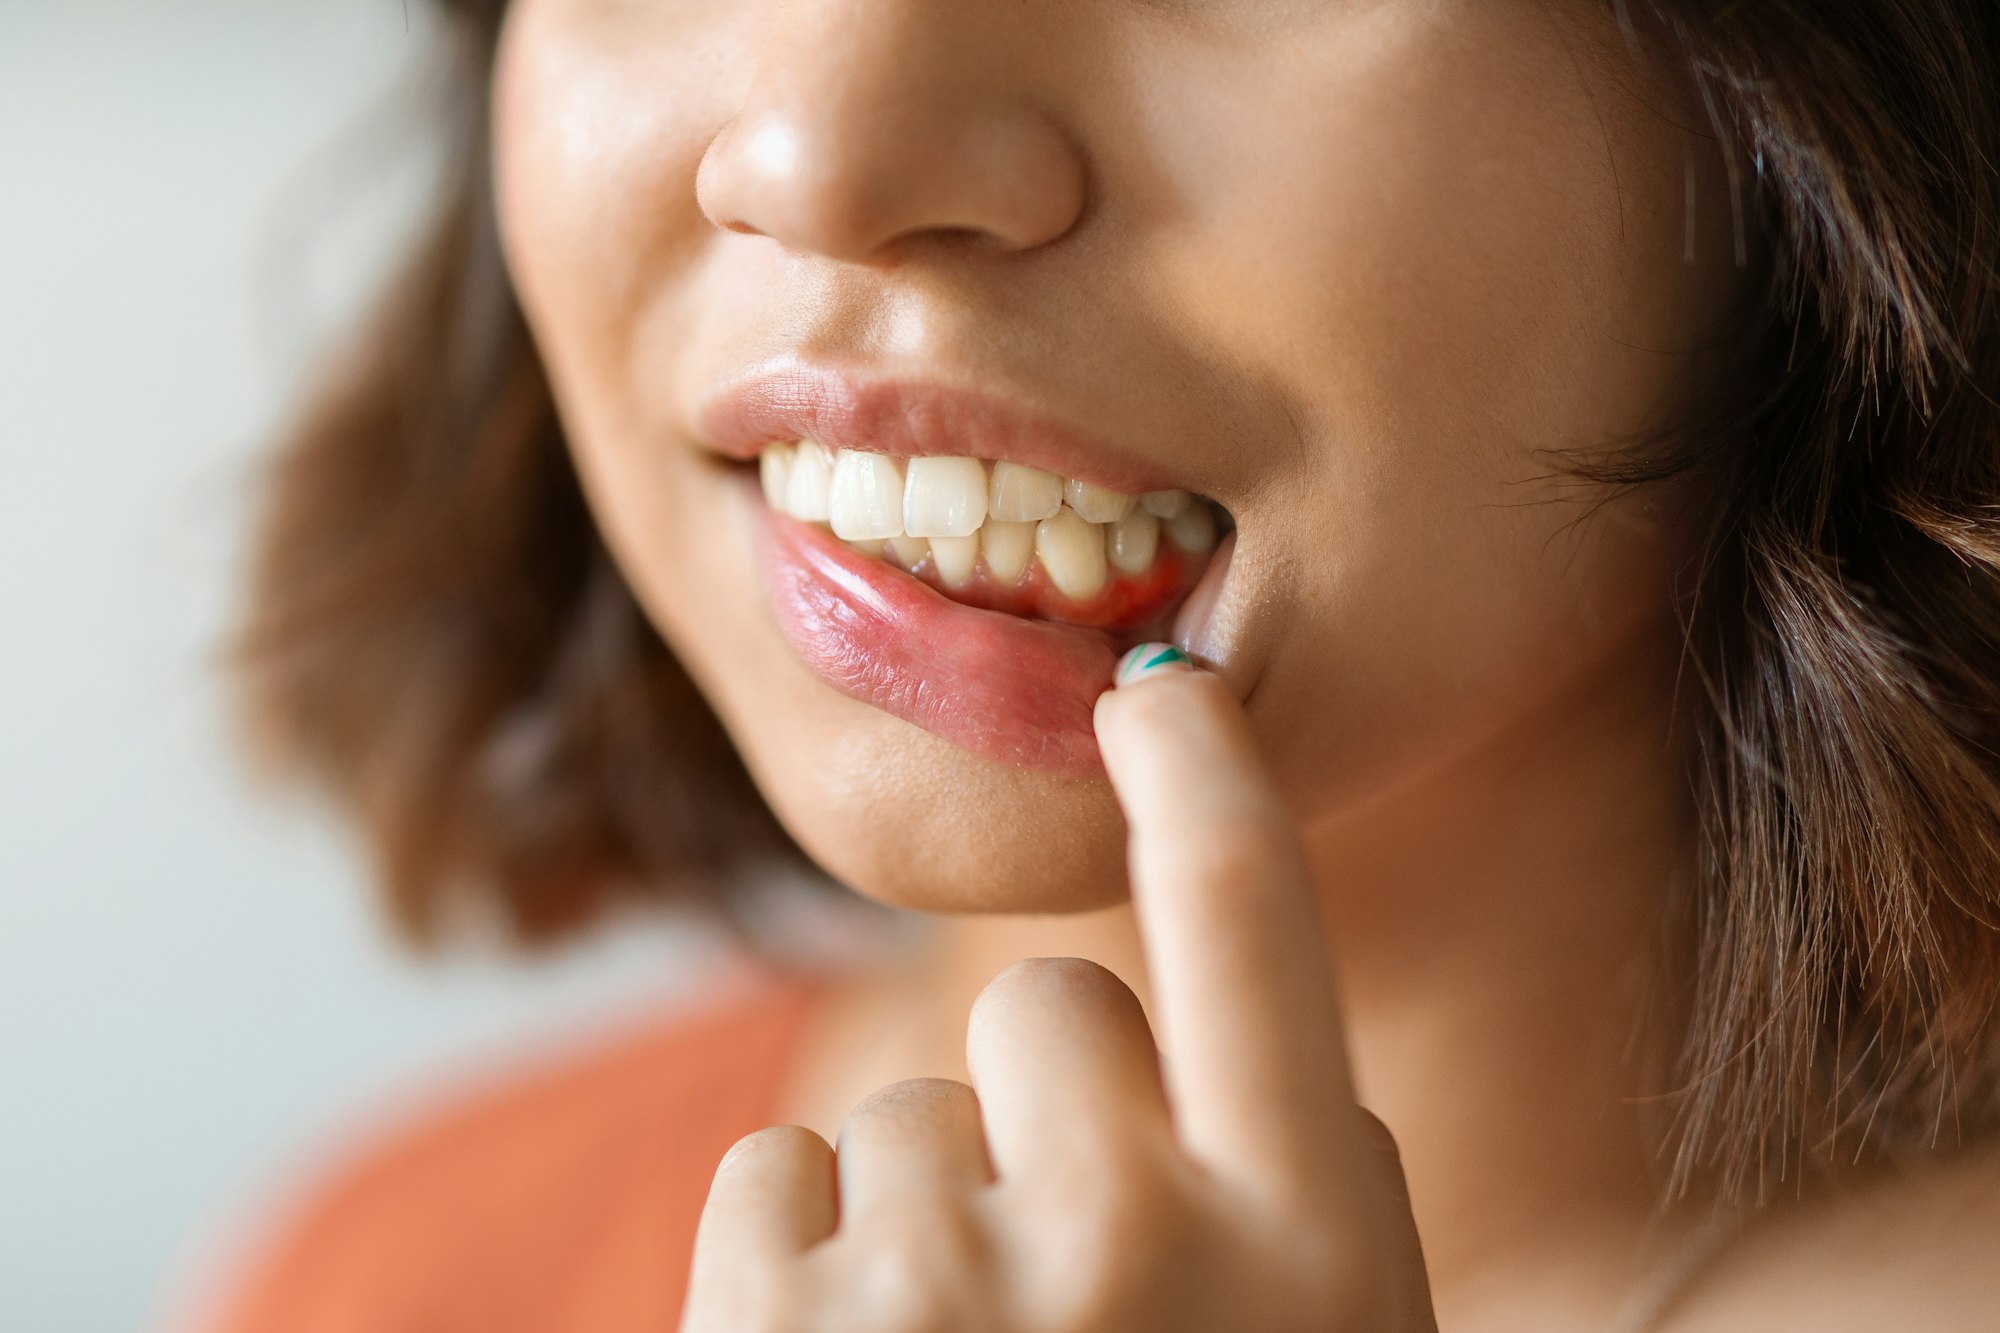 Young woman pulling her bottom lip down to show irritated gums, indicating early signs of Gingivitis addressed at Schlueter Periodontics.